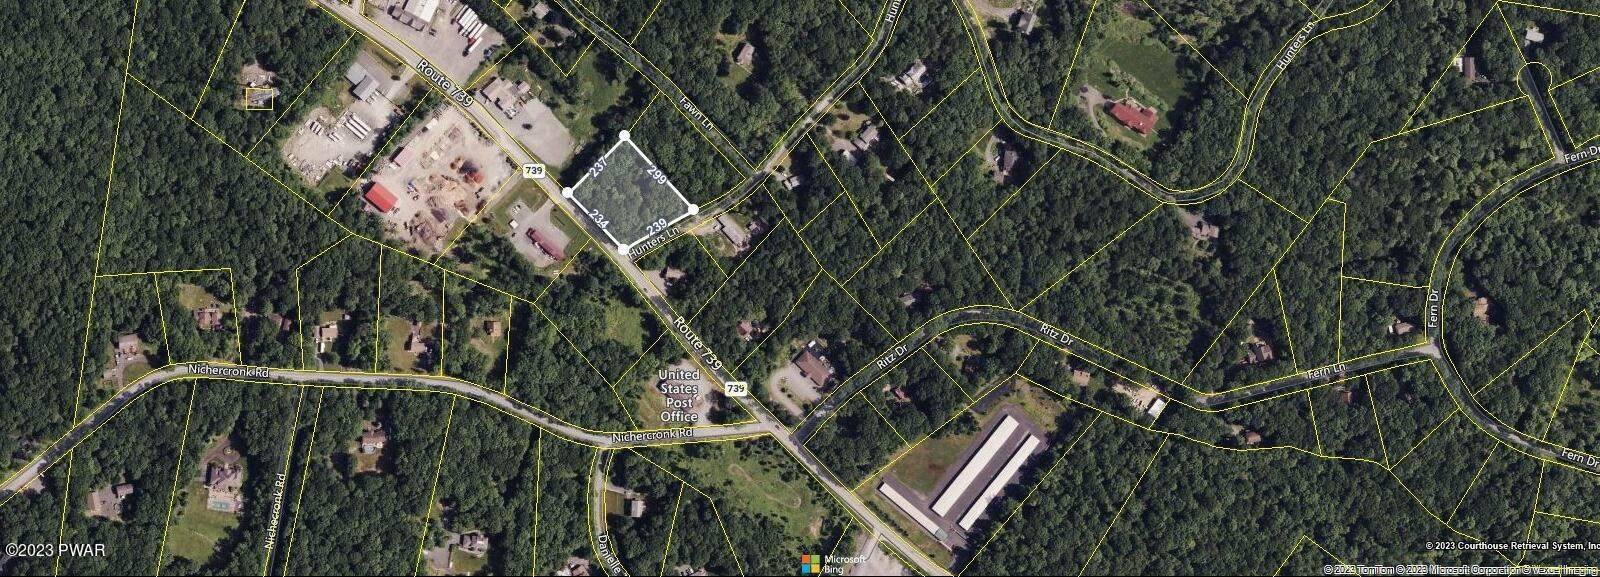 Property for Sale at 9507.02/1 Route 739 Dingmans Ferry, Pennsylvania 18328 United States